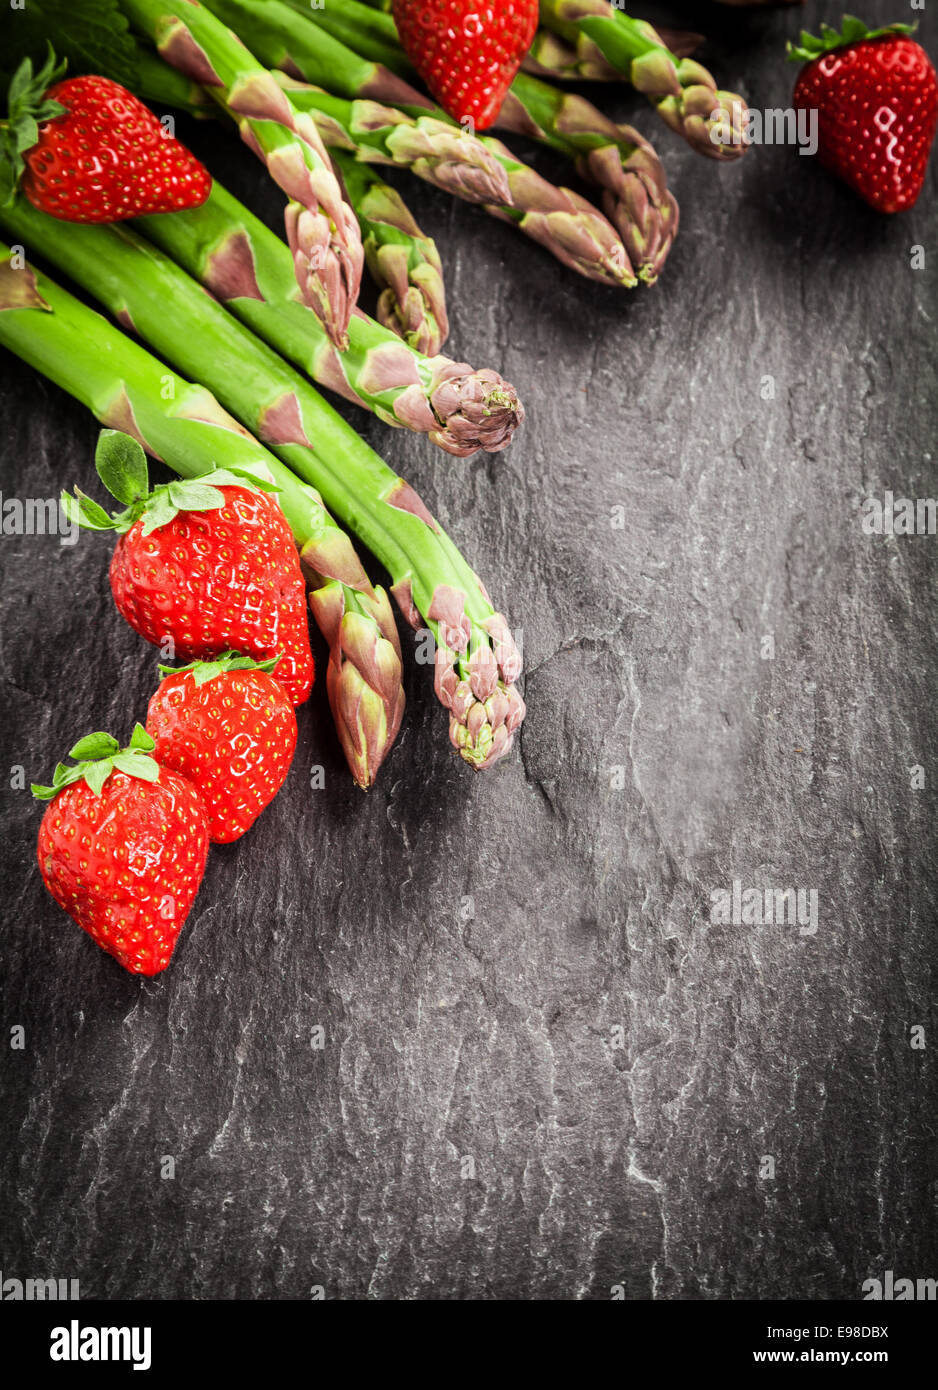 Fresh uncooked green asparagus spears and ripe red strawberries arranged as a corner decoration on textured grey slate with copyspace and vignetting Stock Photo